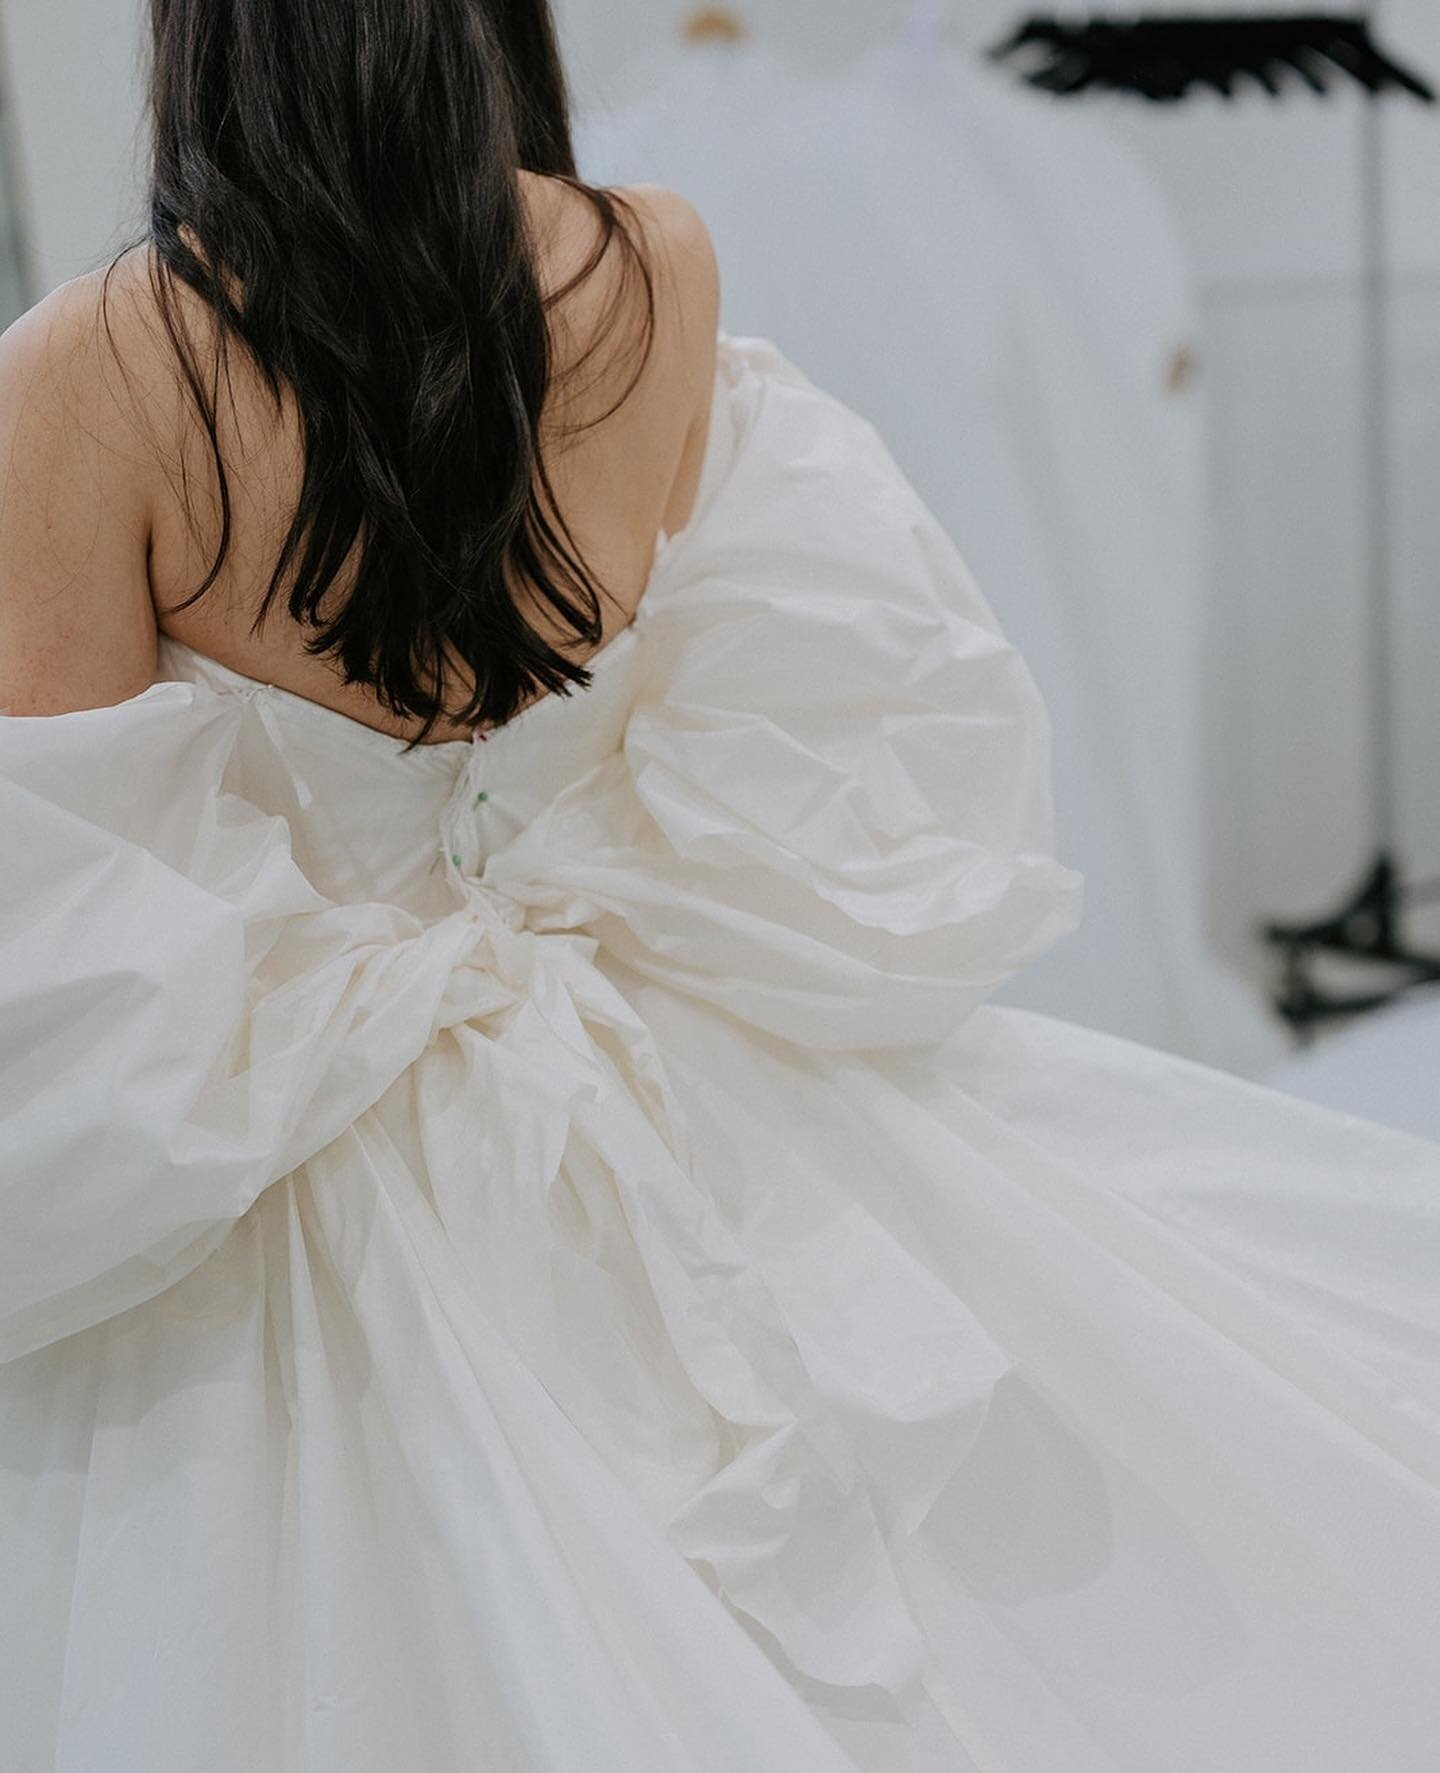 A few stills from Nikita&rsquo;s dress fitting at @ellysofocli⁠.
⁠
If you are investing in a custom gown for your special day, the experience deserves its own story beyond the studio captured in editorial frames. ⁠
⁠
Get in touch if you would like to